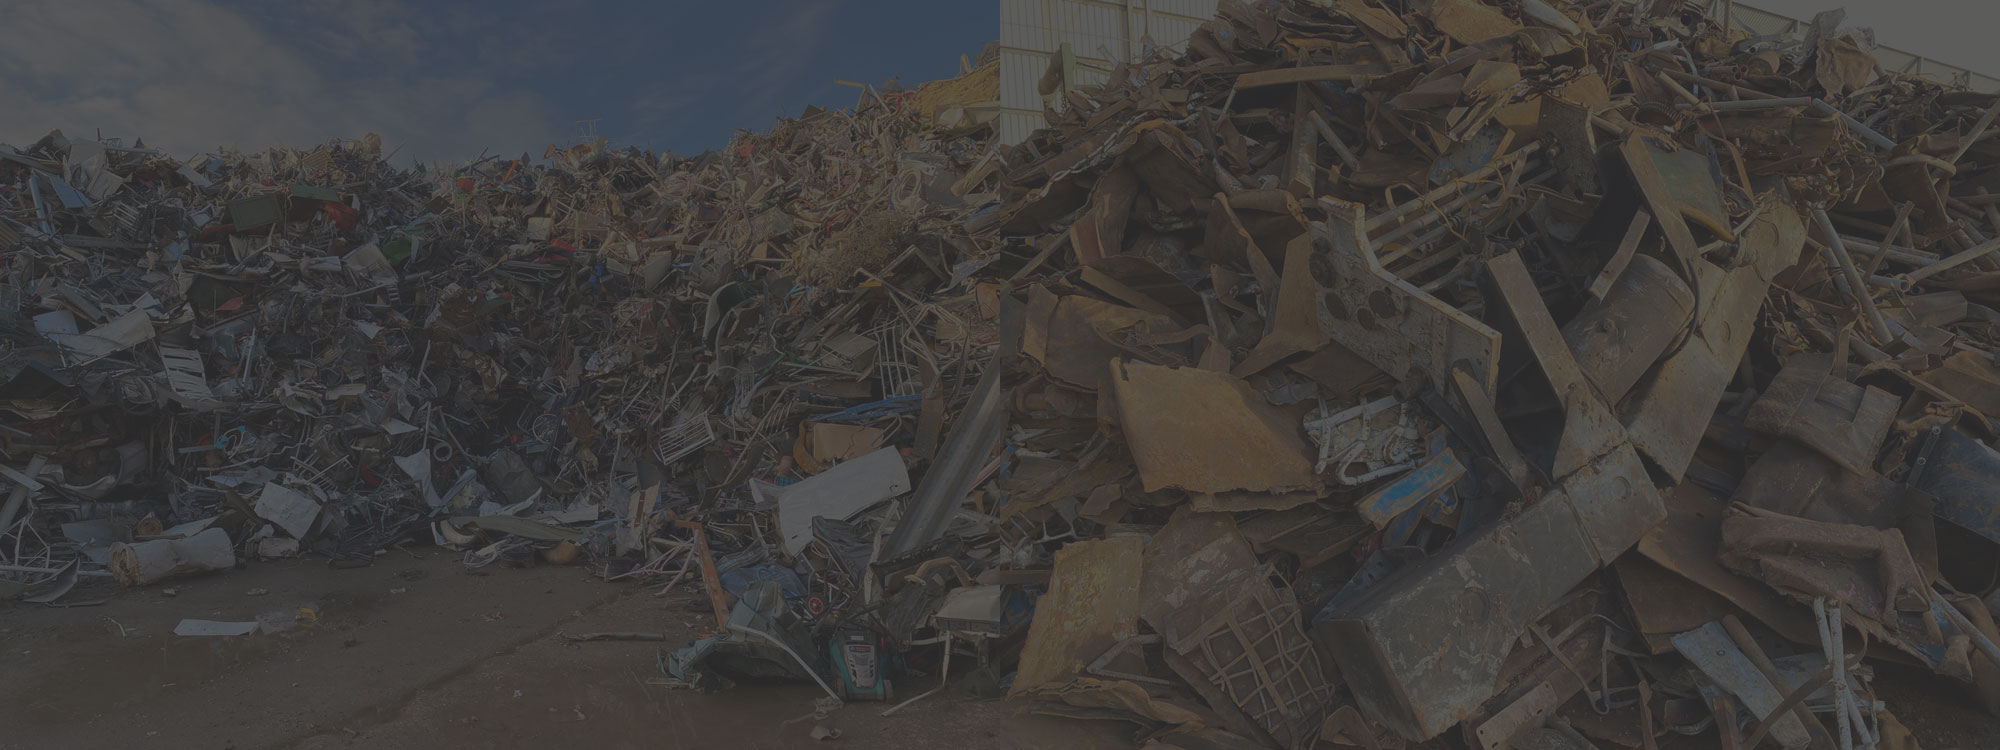 Scrap Metal Recycling for Milton Keynes and surrounding areas